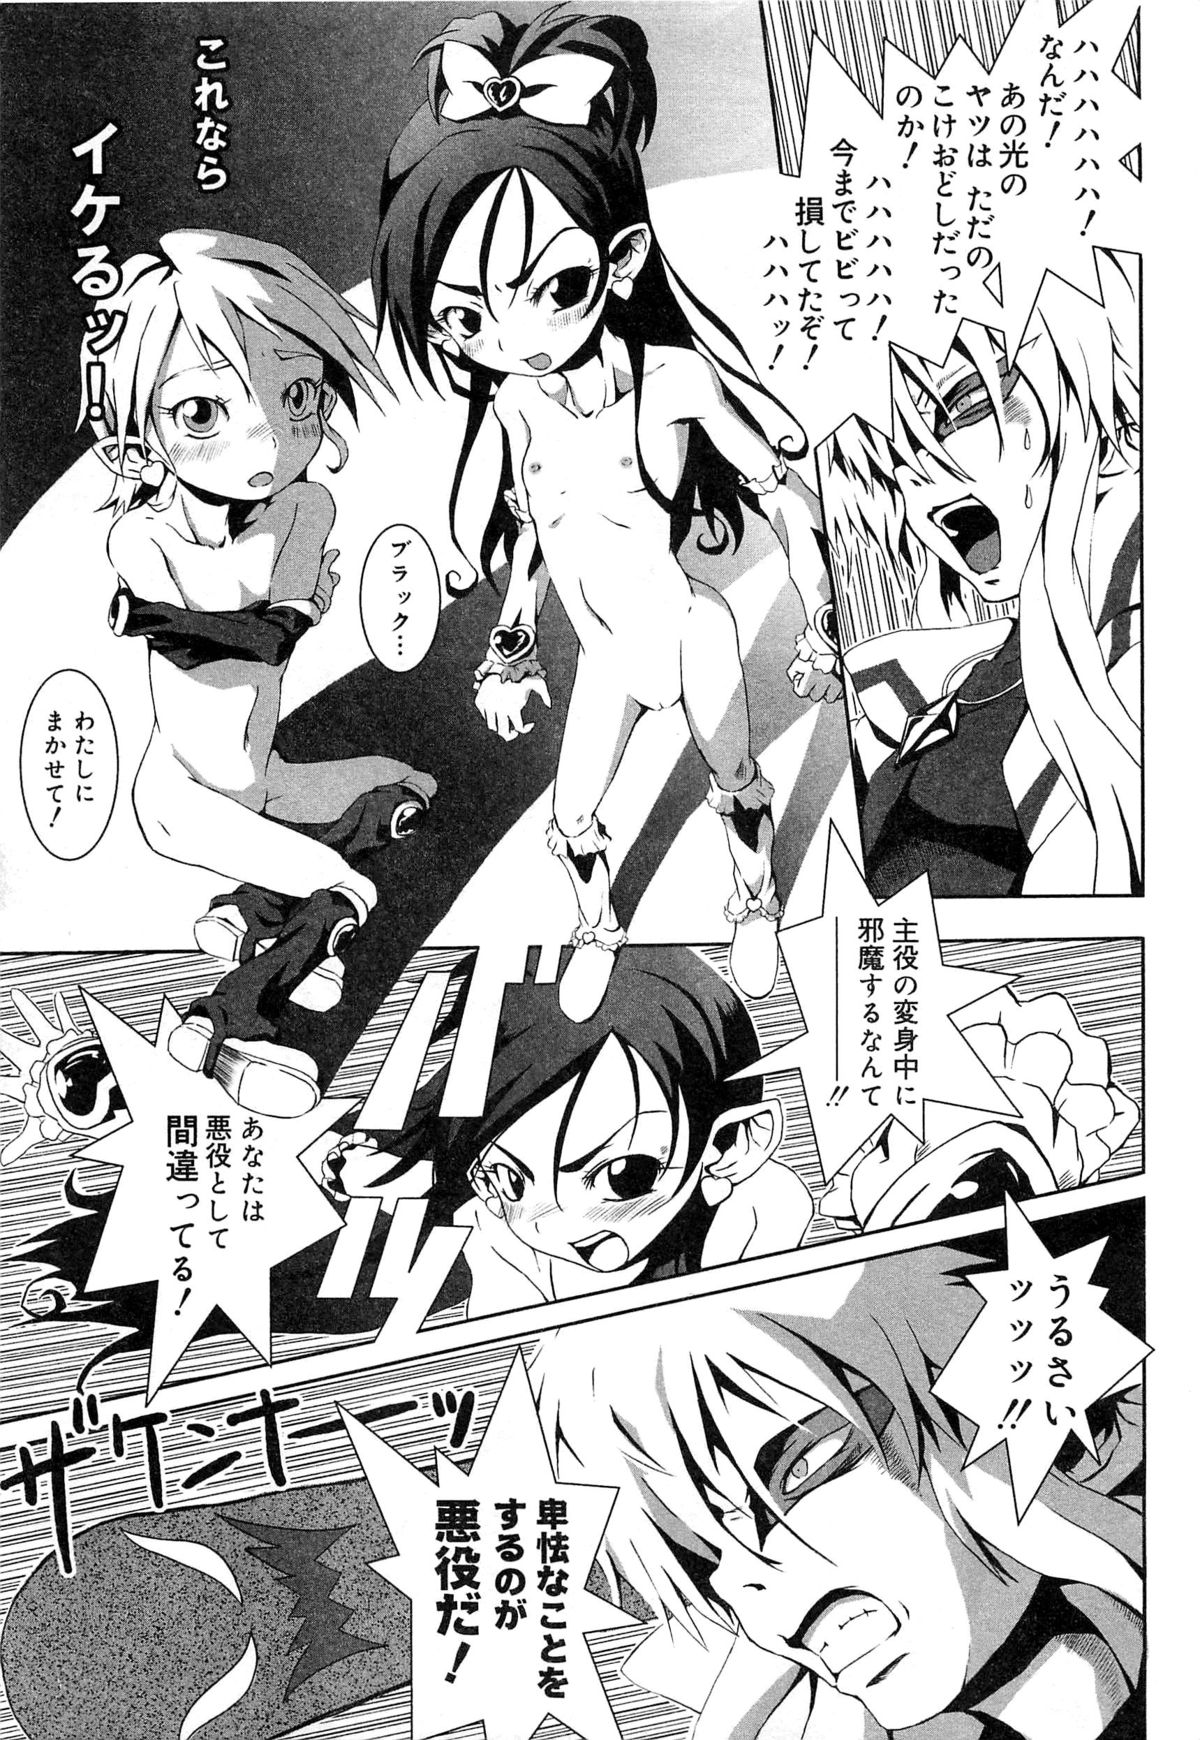 [Anthology] Cure Cure Battle Precure Eroparo page 12 full